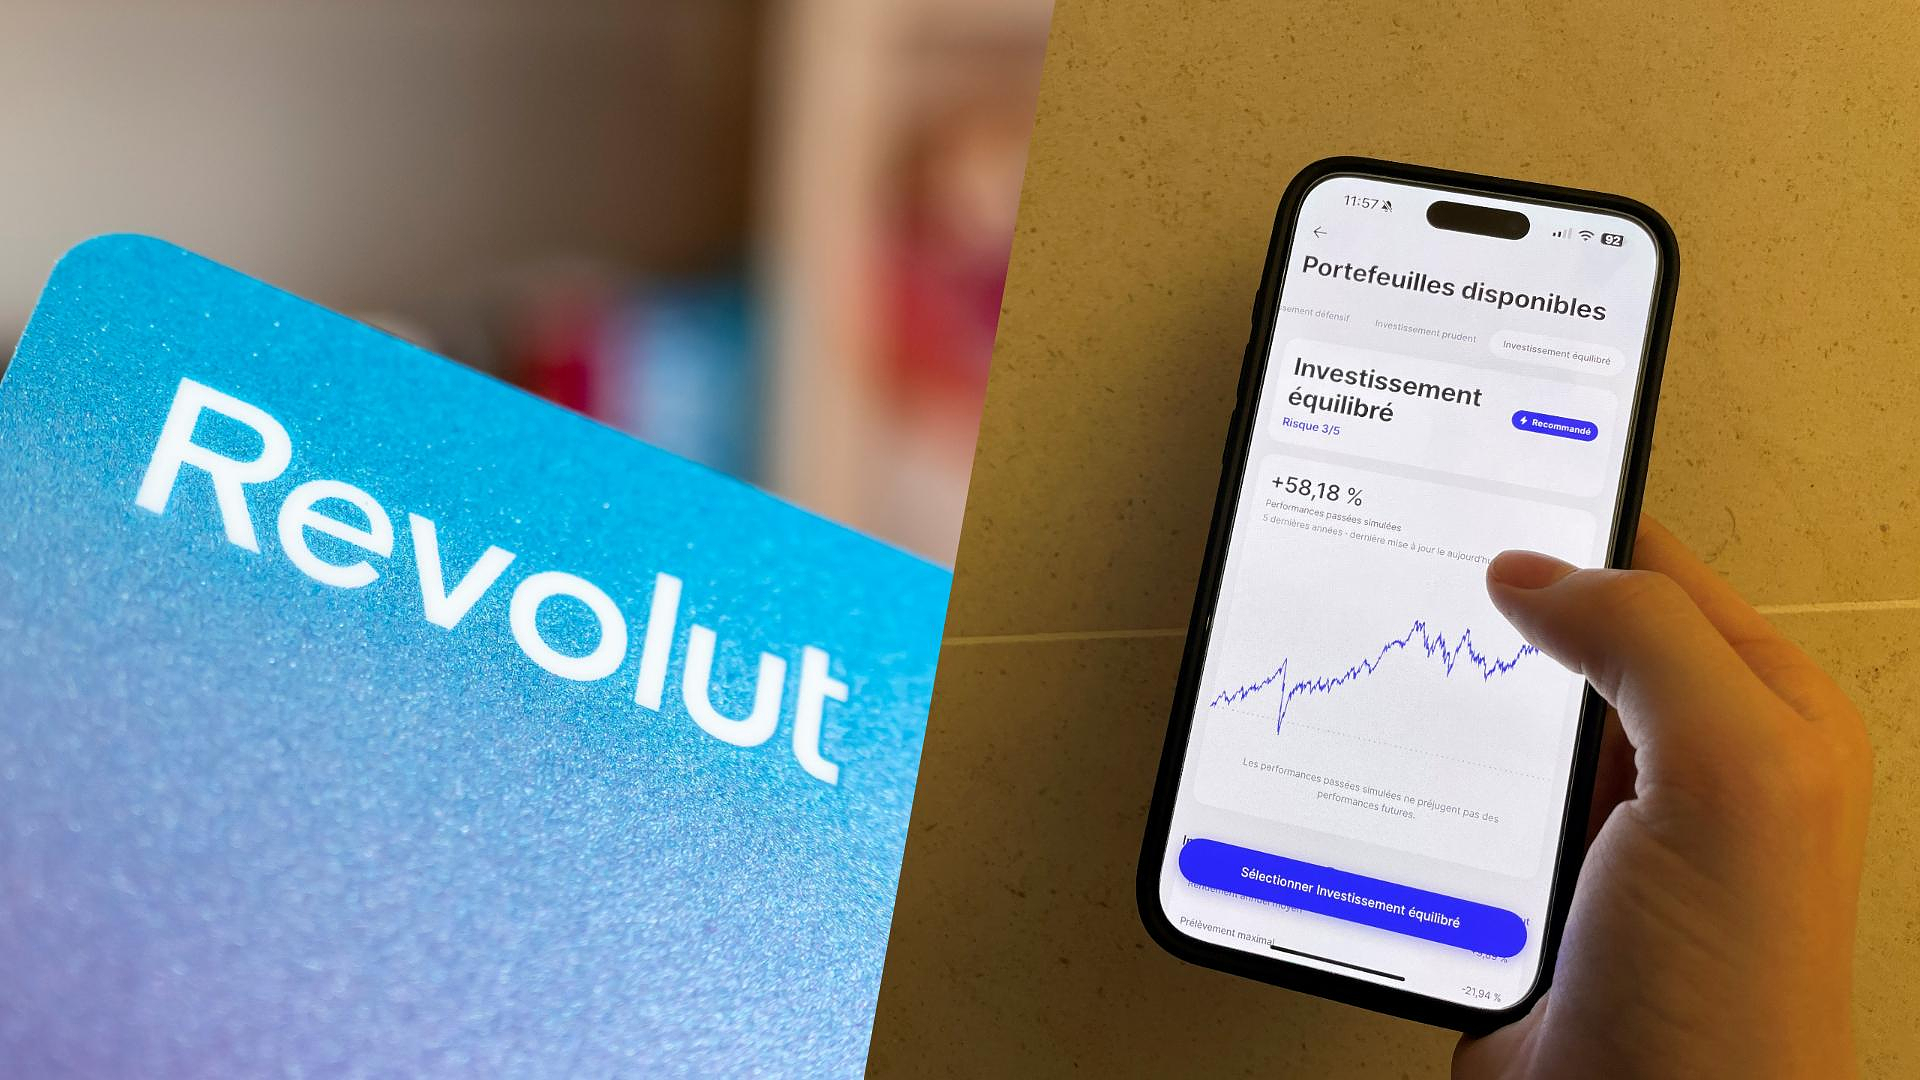 Revolut launches a tool that invests your money for you